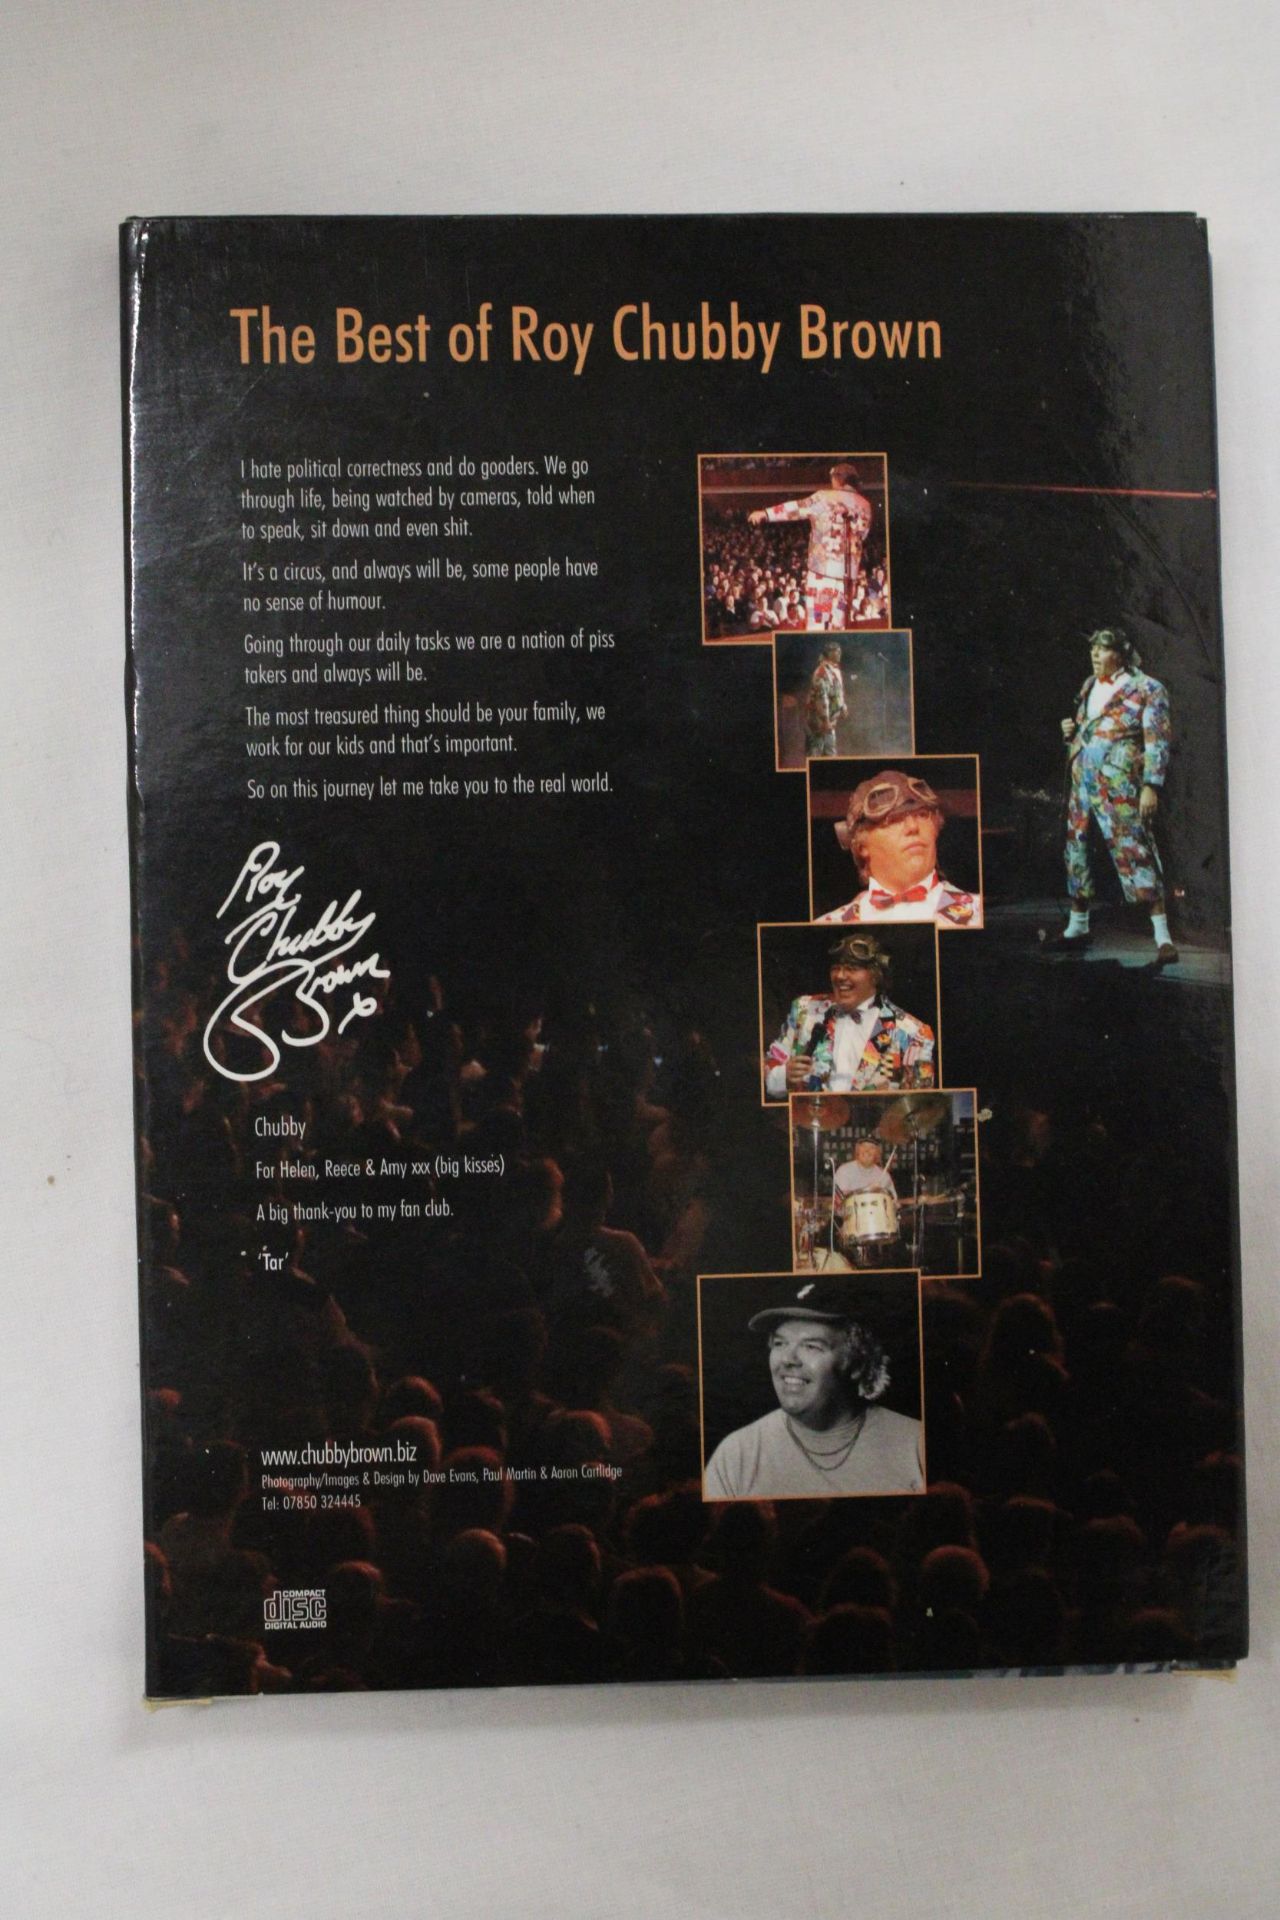 A SPECIAL DOUBLE COLLECTORS EDITION DVD OF THE BEST OF ROY CHUBBY BROWN, SIGNED TO THE FRONT - Image 4 of 4